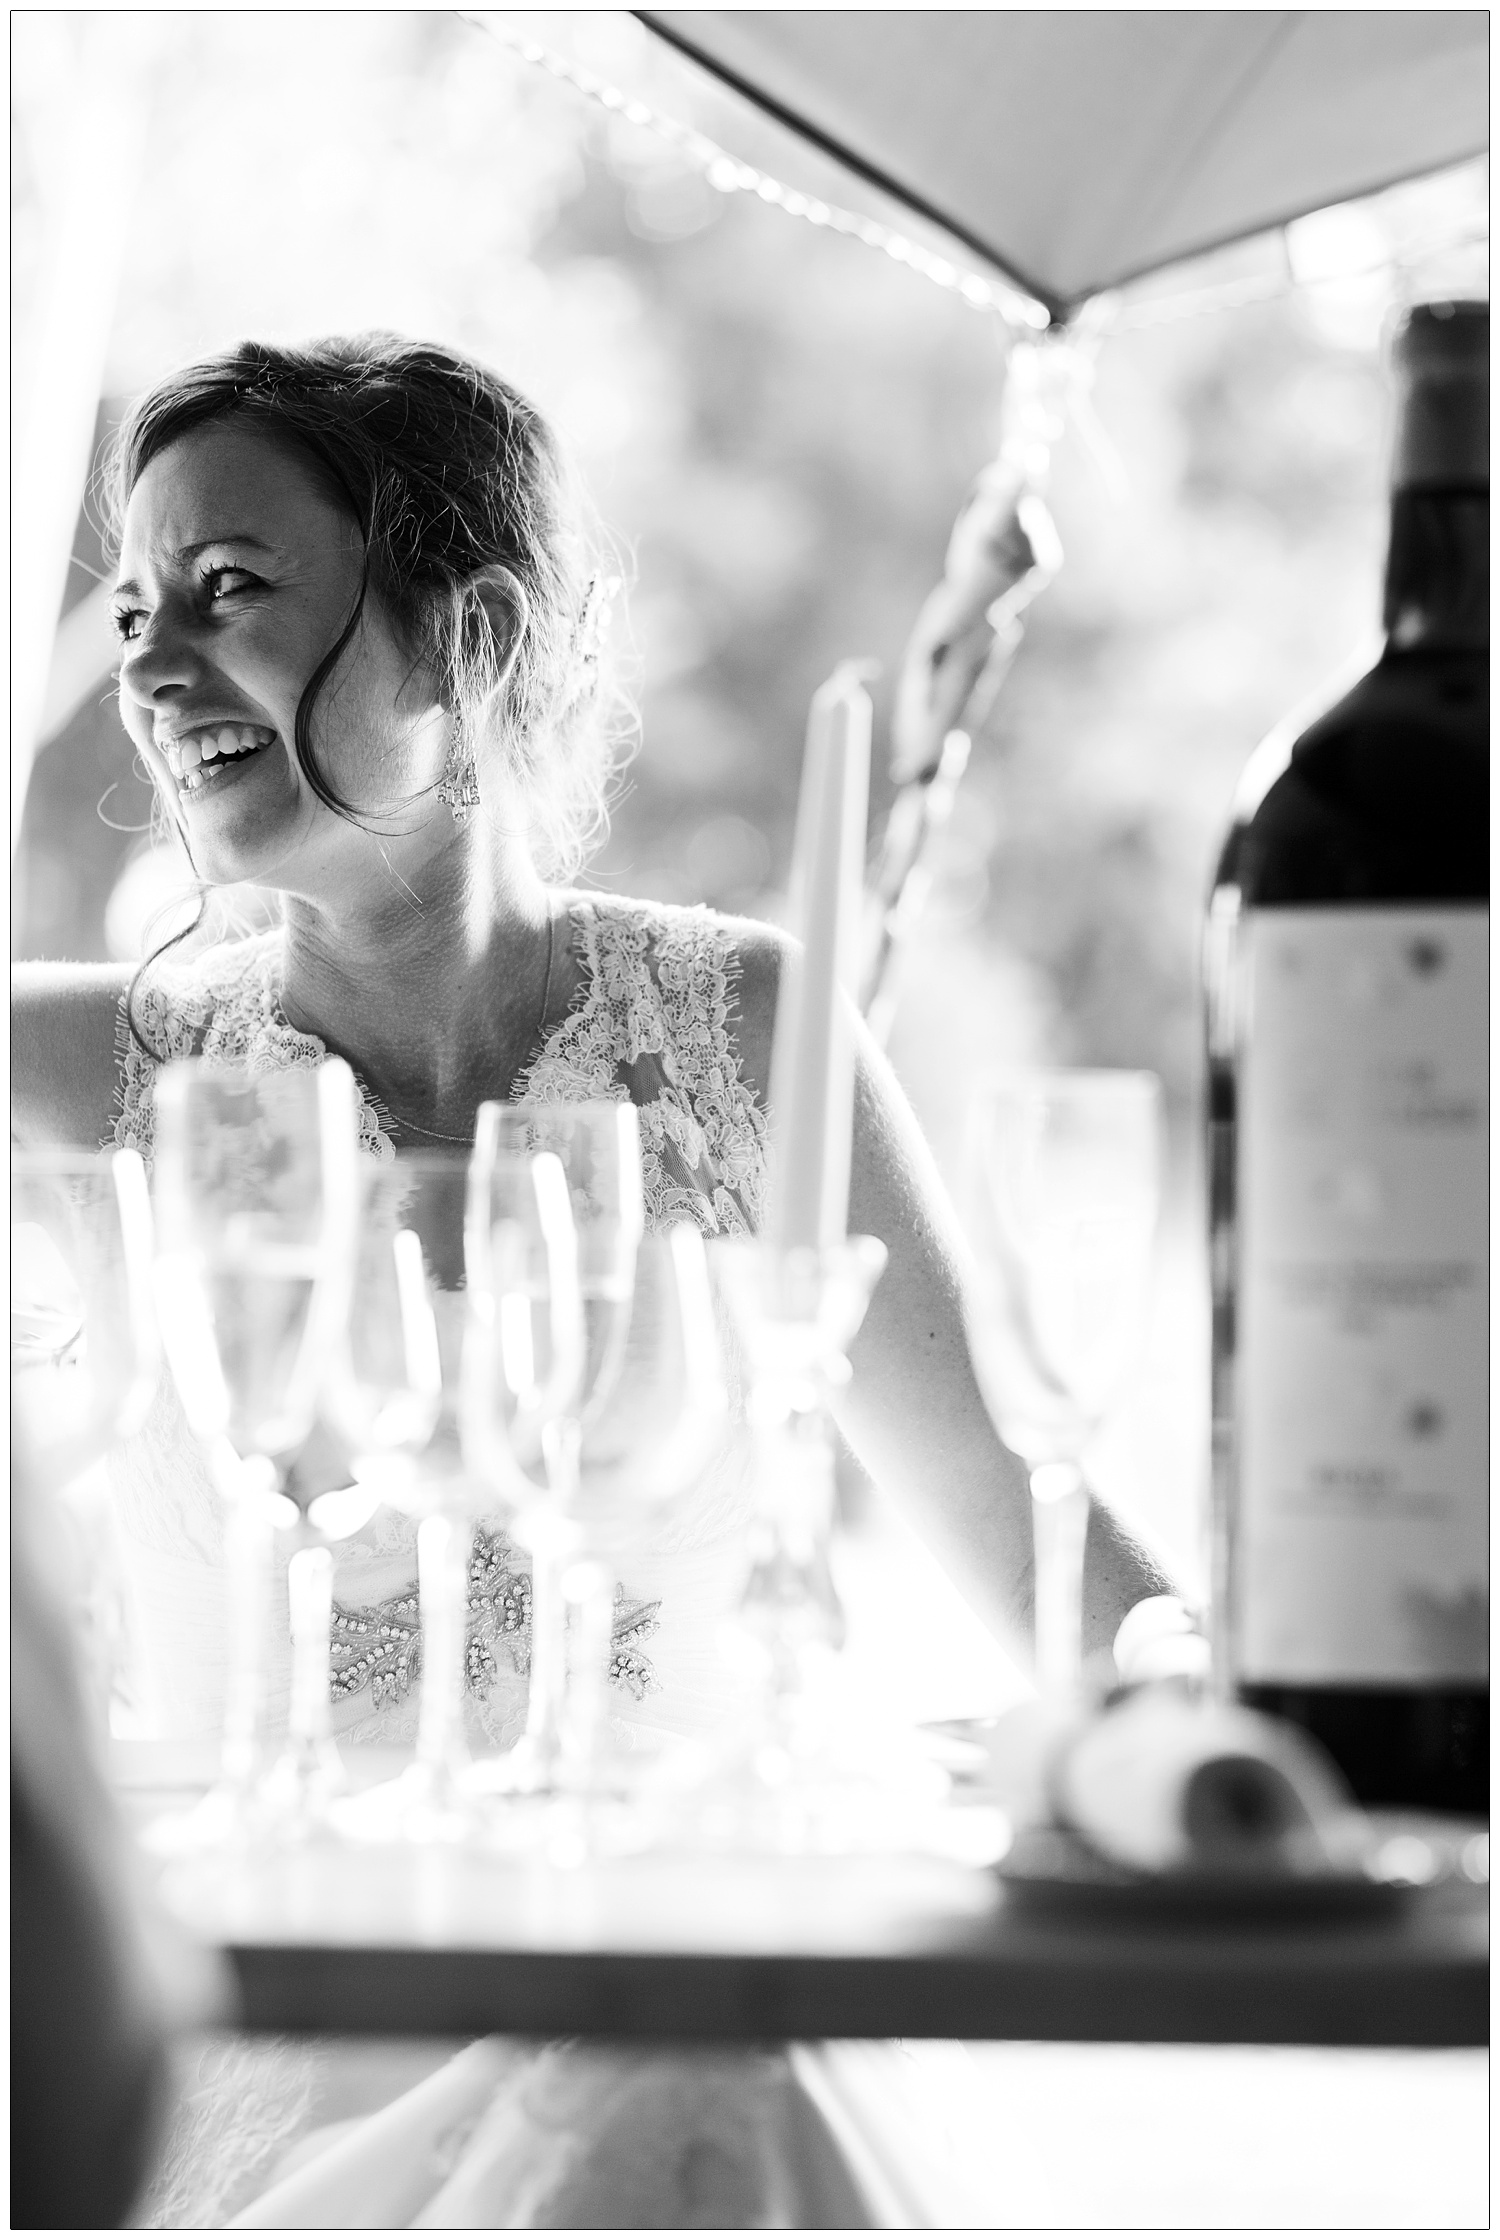 A reportage style wedding photograph of a bride laughing sat at a table. The table is full of champagne flutes and a big bottle of wine.